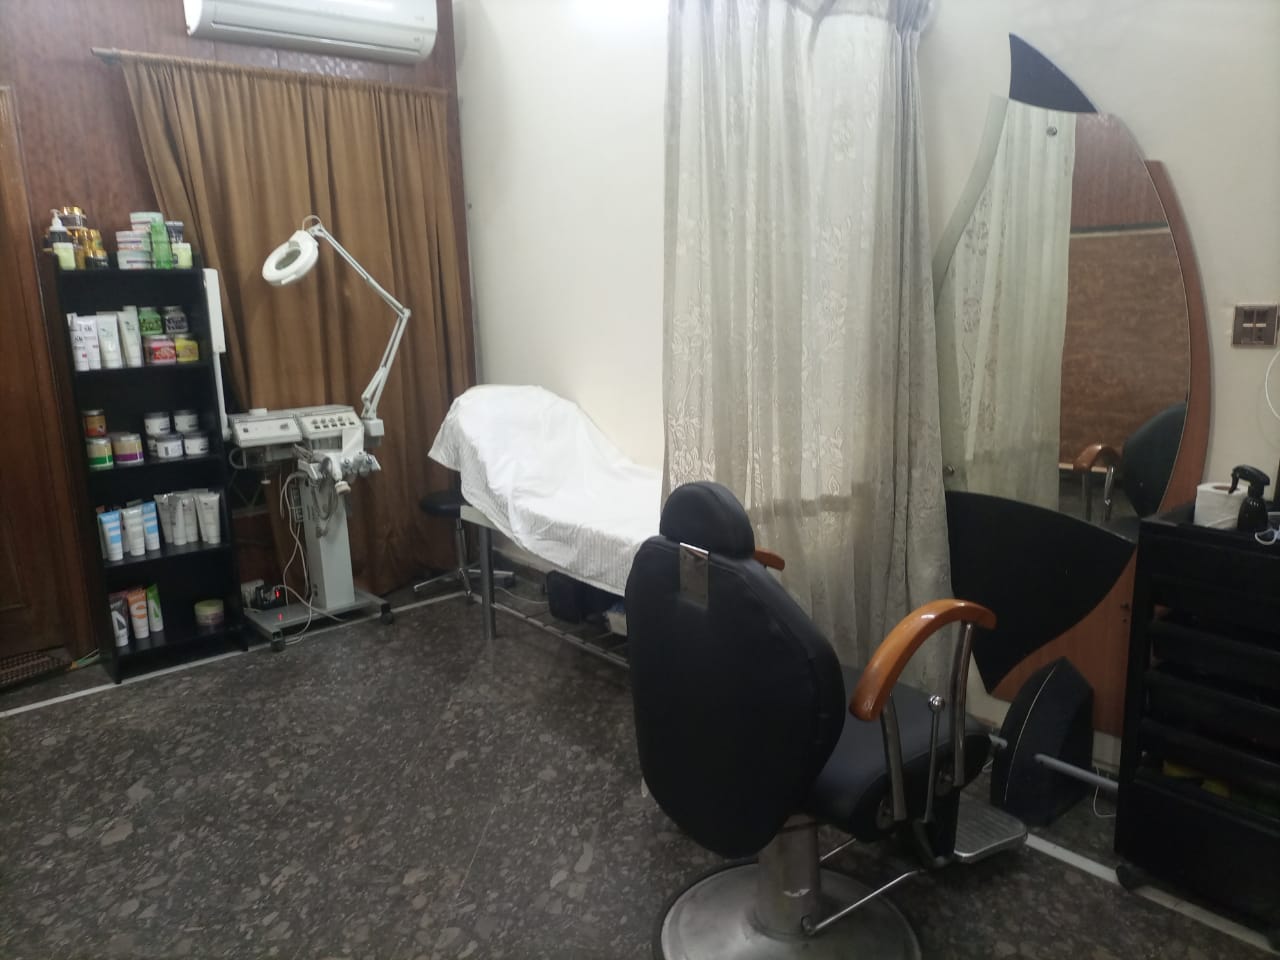 Whitening Facial + Face Polisher + Hot Oil Massage + Whitening Manicure + Whitening Pedicure with Polisher + Threading (Eye brow+Upper lips) by Mirrors Beauty Lounge, Wapda town, Lahore.